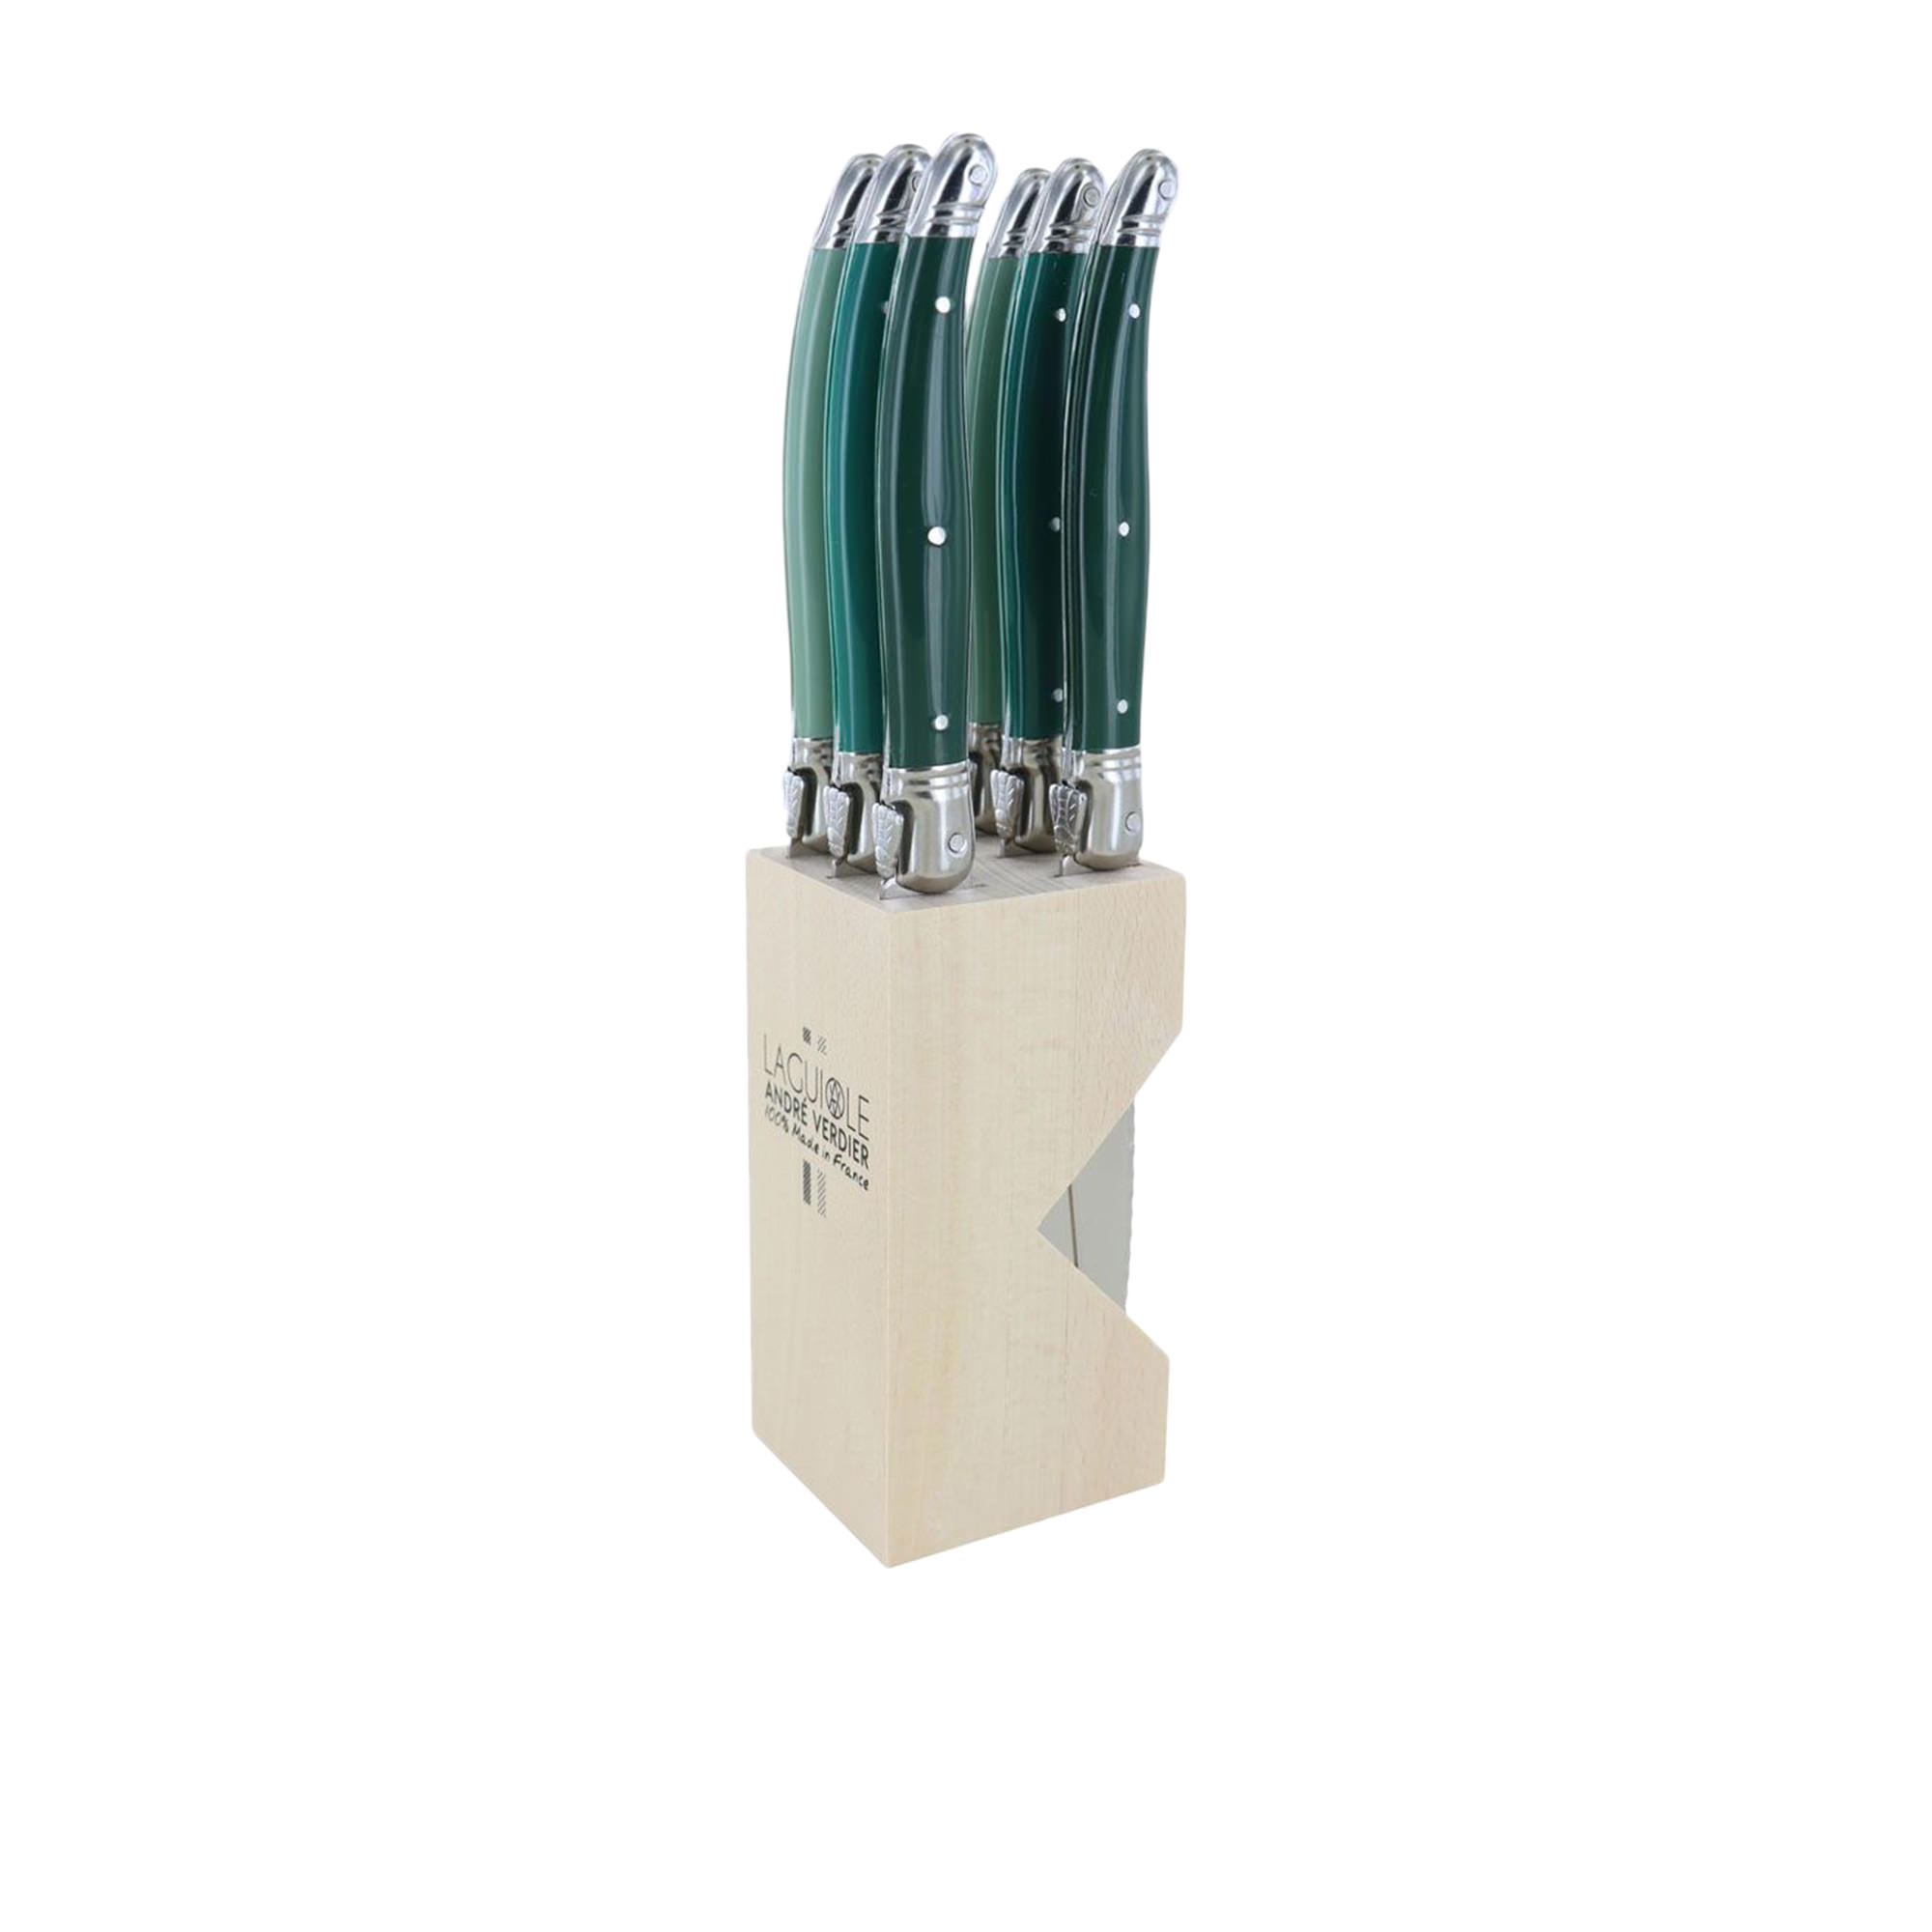 Laguiole by Andre Verdier Debutant 7pc Serrated Knife Block Set Forest Green Image 1